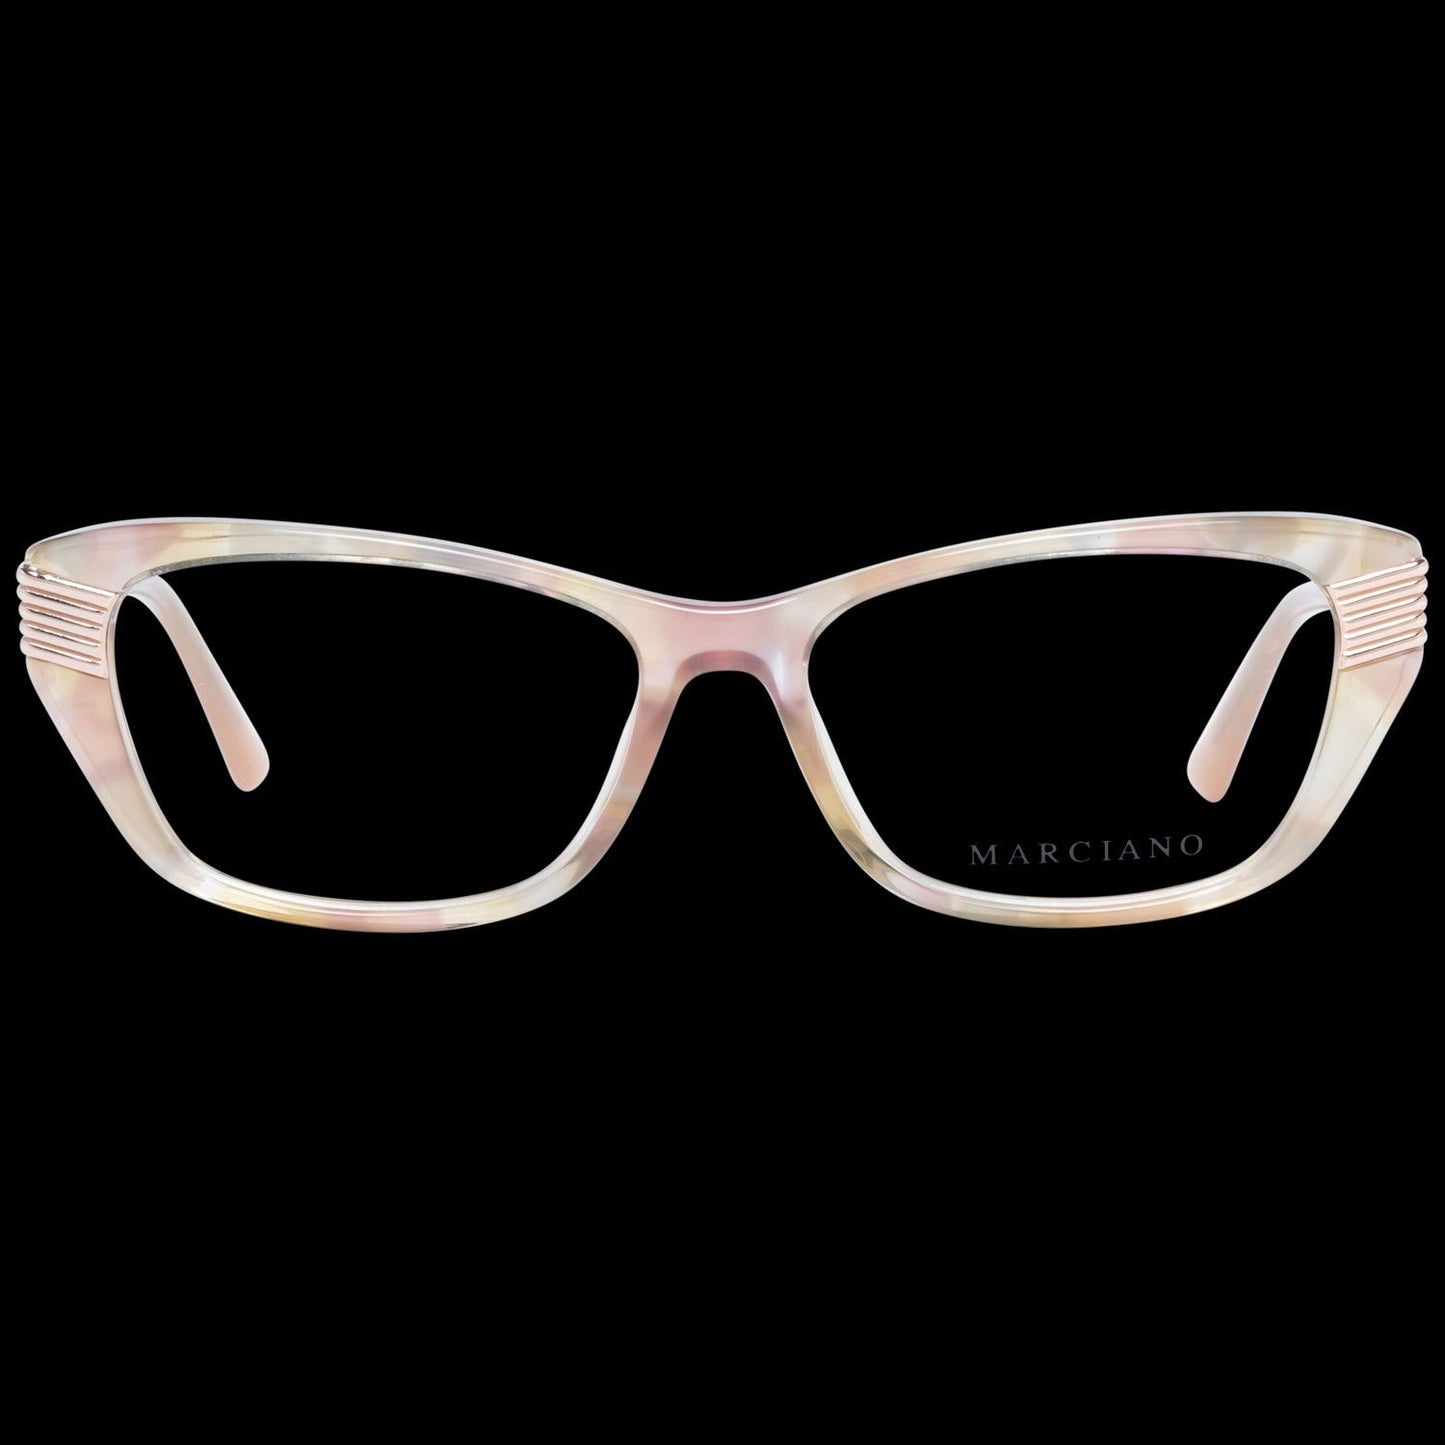 MARCIANO By GUESS EYEWEAR MARCIANO BY GUESS MOD. GM0385 53059 SUNGLASSES & EYEWEAR marciano-by-guess-mod-gm0385-53059